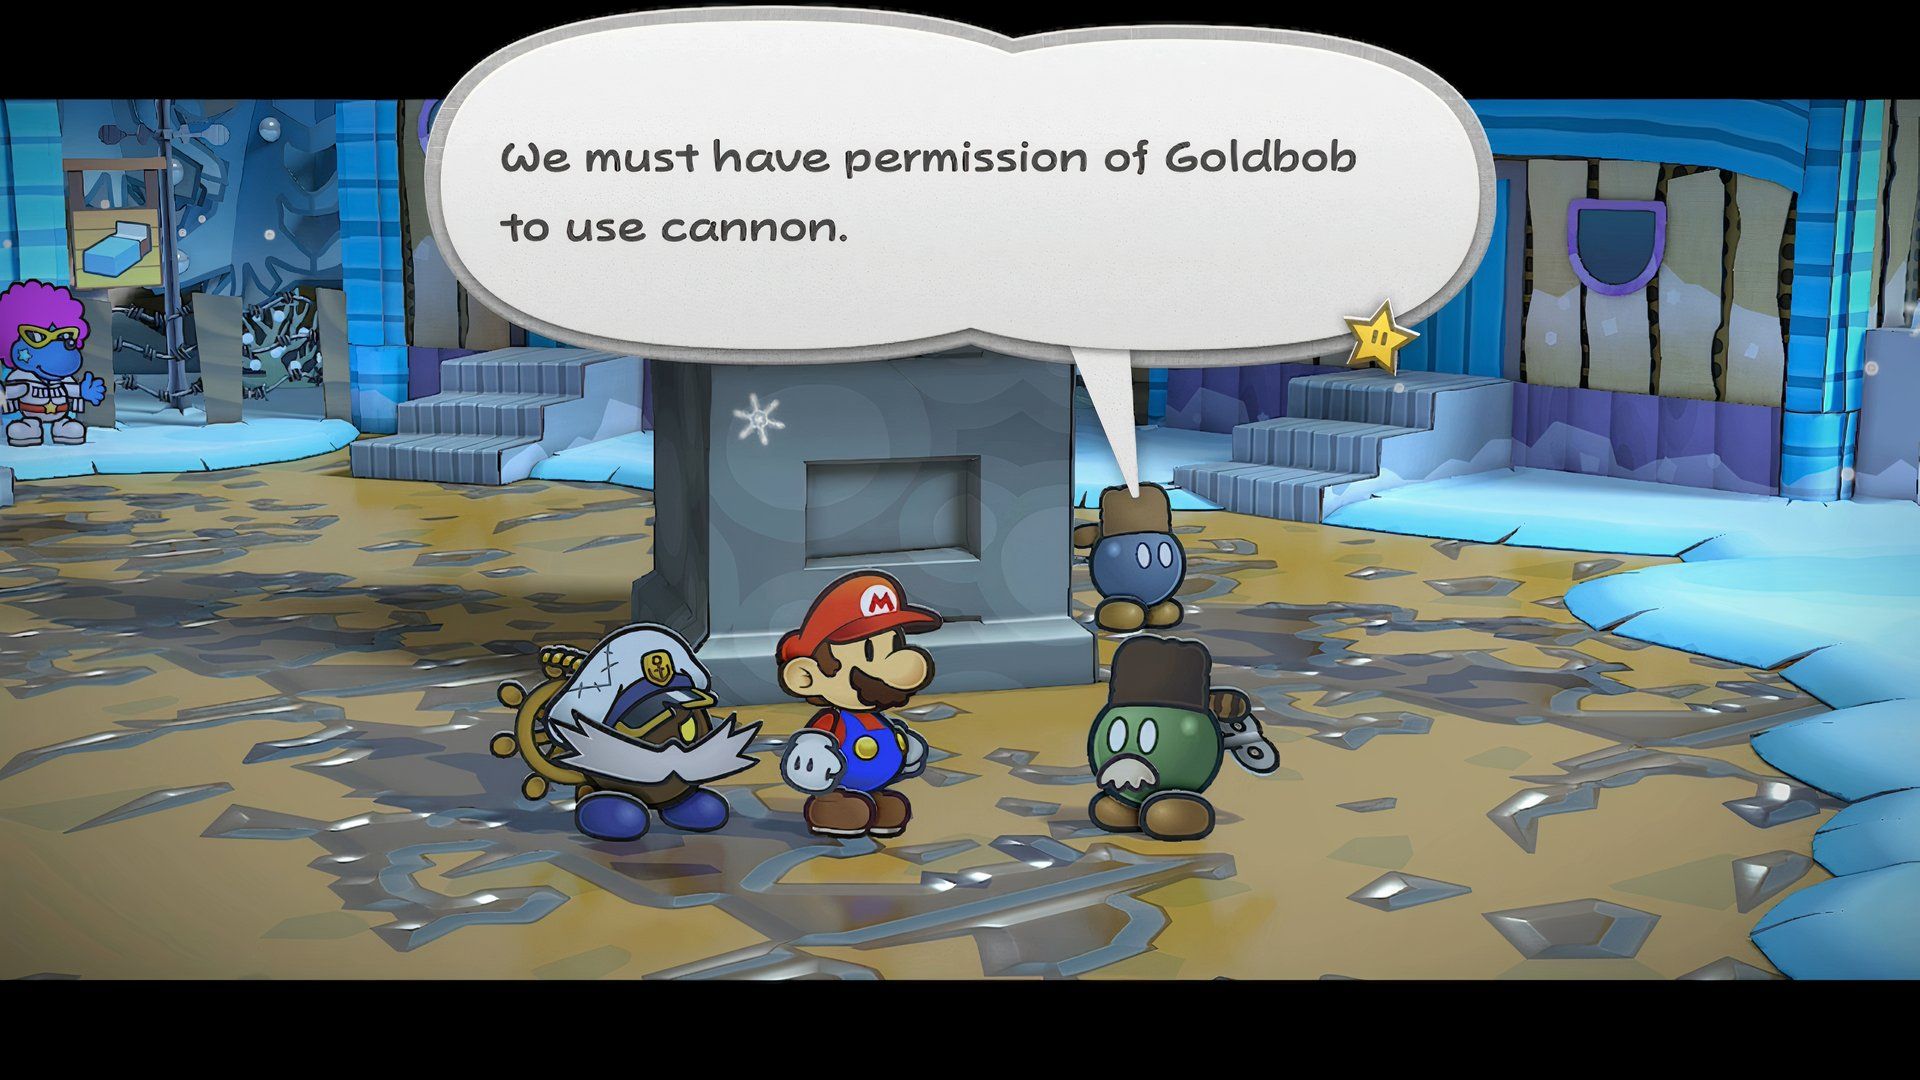 Paper Mario: The Thousand-Year Door - Goldbob's Permission for Fahr Outpost Cannon